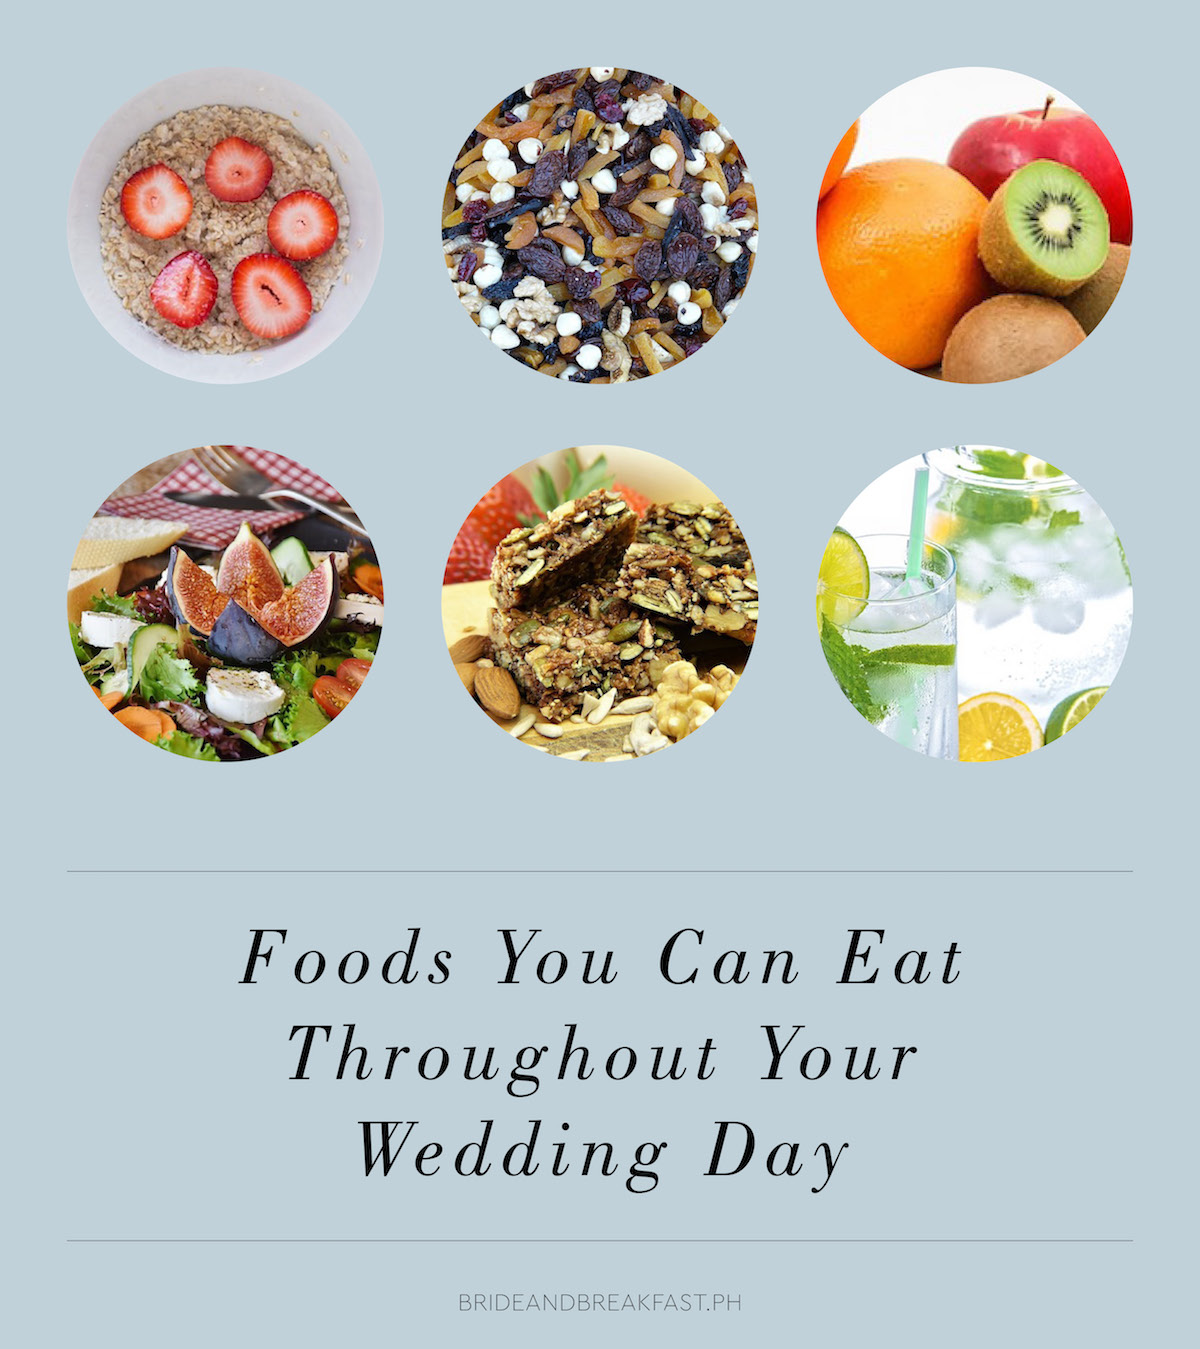 Foods You Can Eat Throughout Your Wedding Day